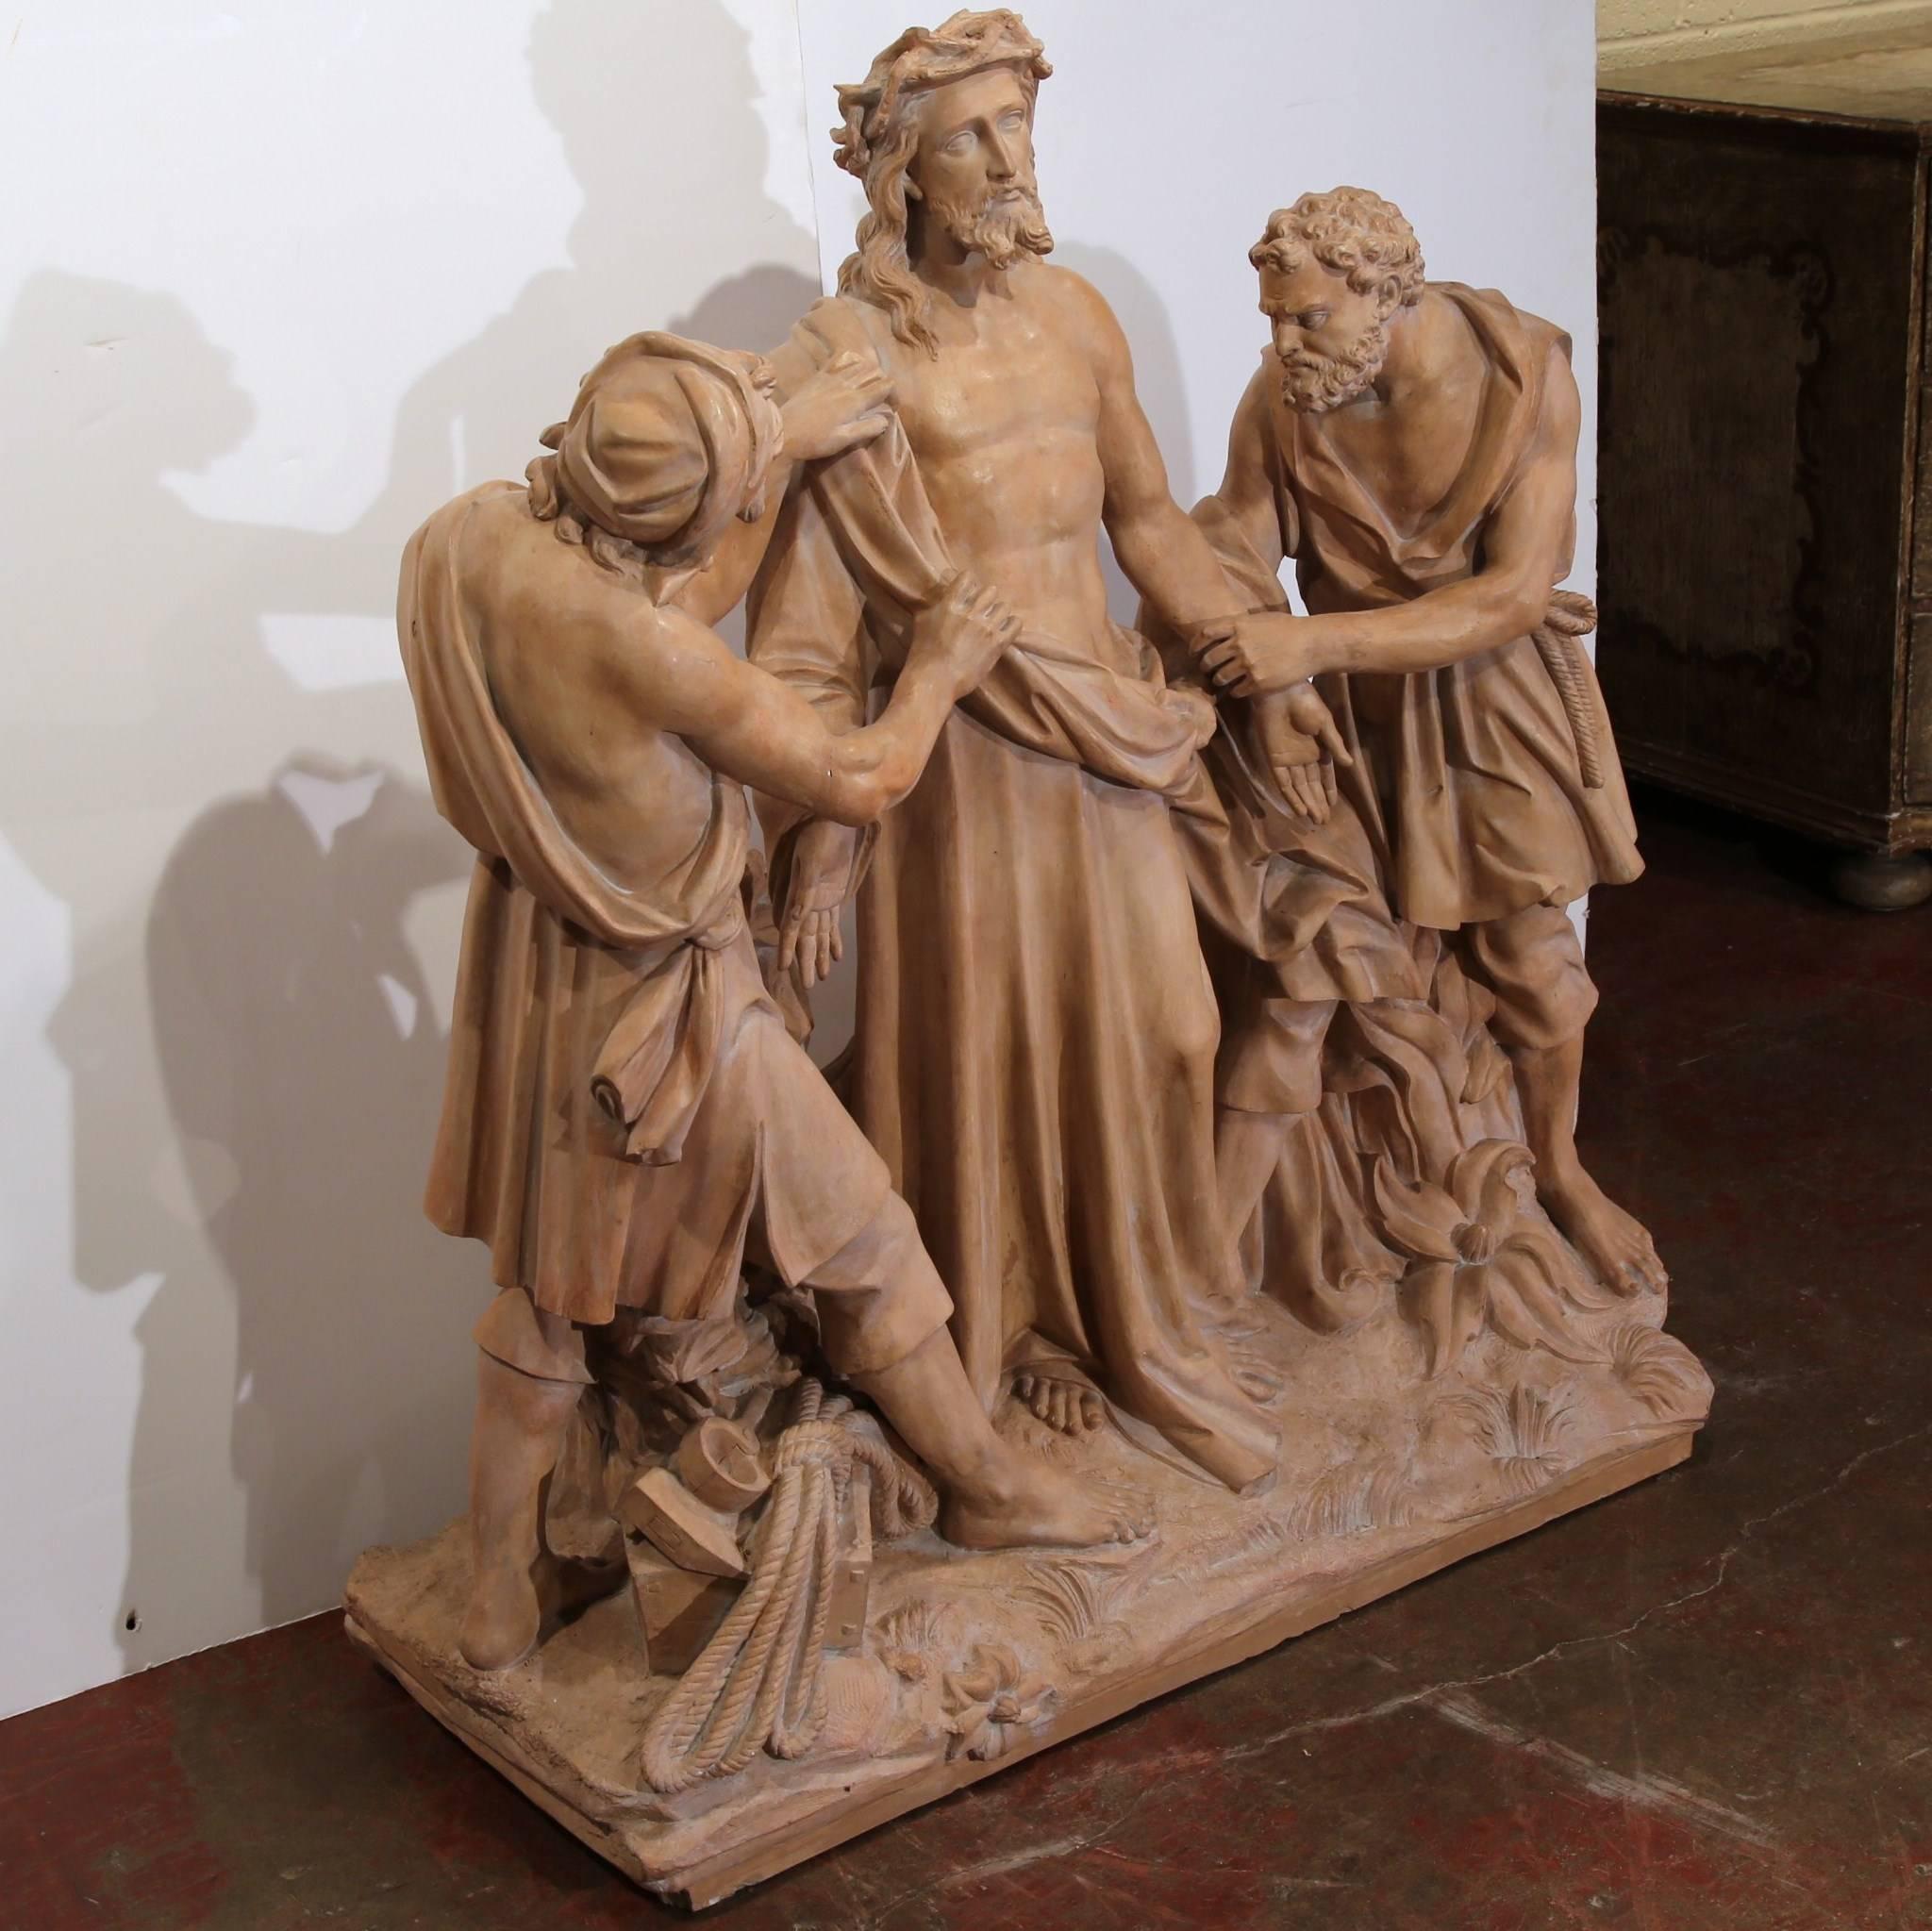 This important, antique sculpture was crafted in France, circa 1860, the composition depicts the tenth station of the cross when Jesus clothing are being removed.
In the biblical composition, Christ is being stripped of his garments by two